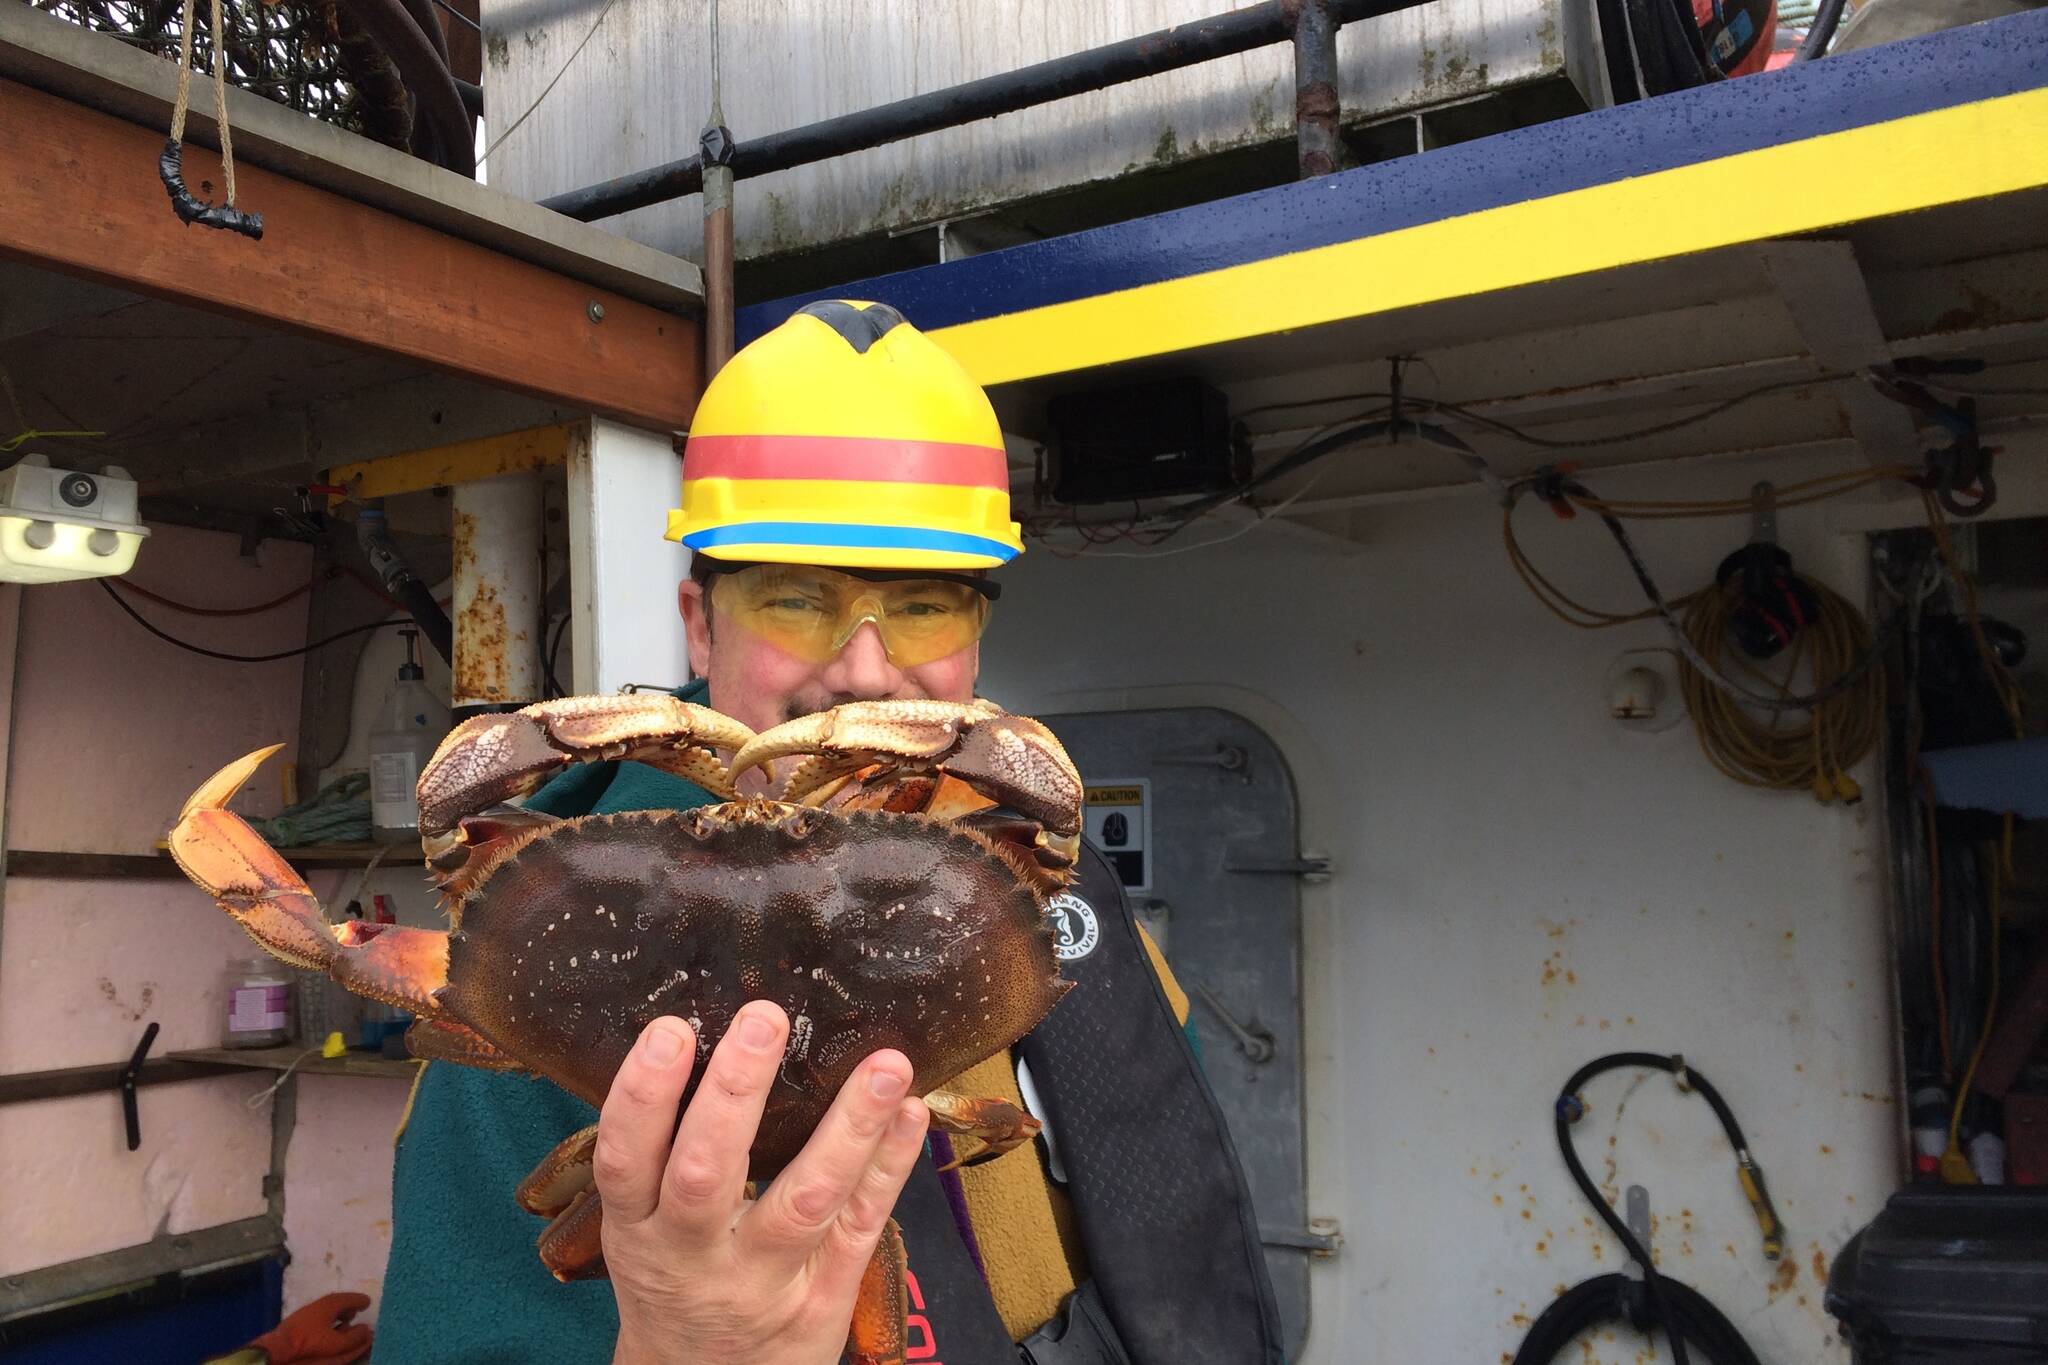 Courtesy Photo/ Joseph Stratman, Alaska Department of Fish and Game
A fisherman holds a Dungeness crab caught during the 2021 season.